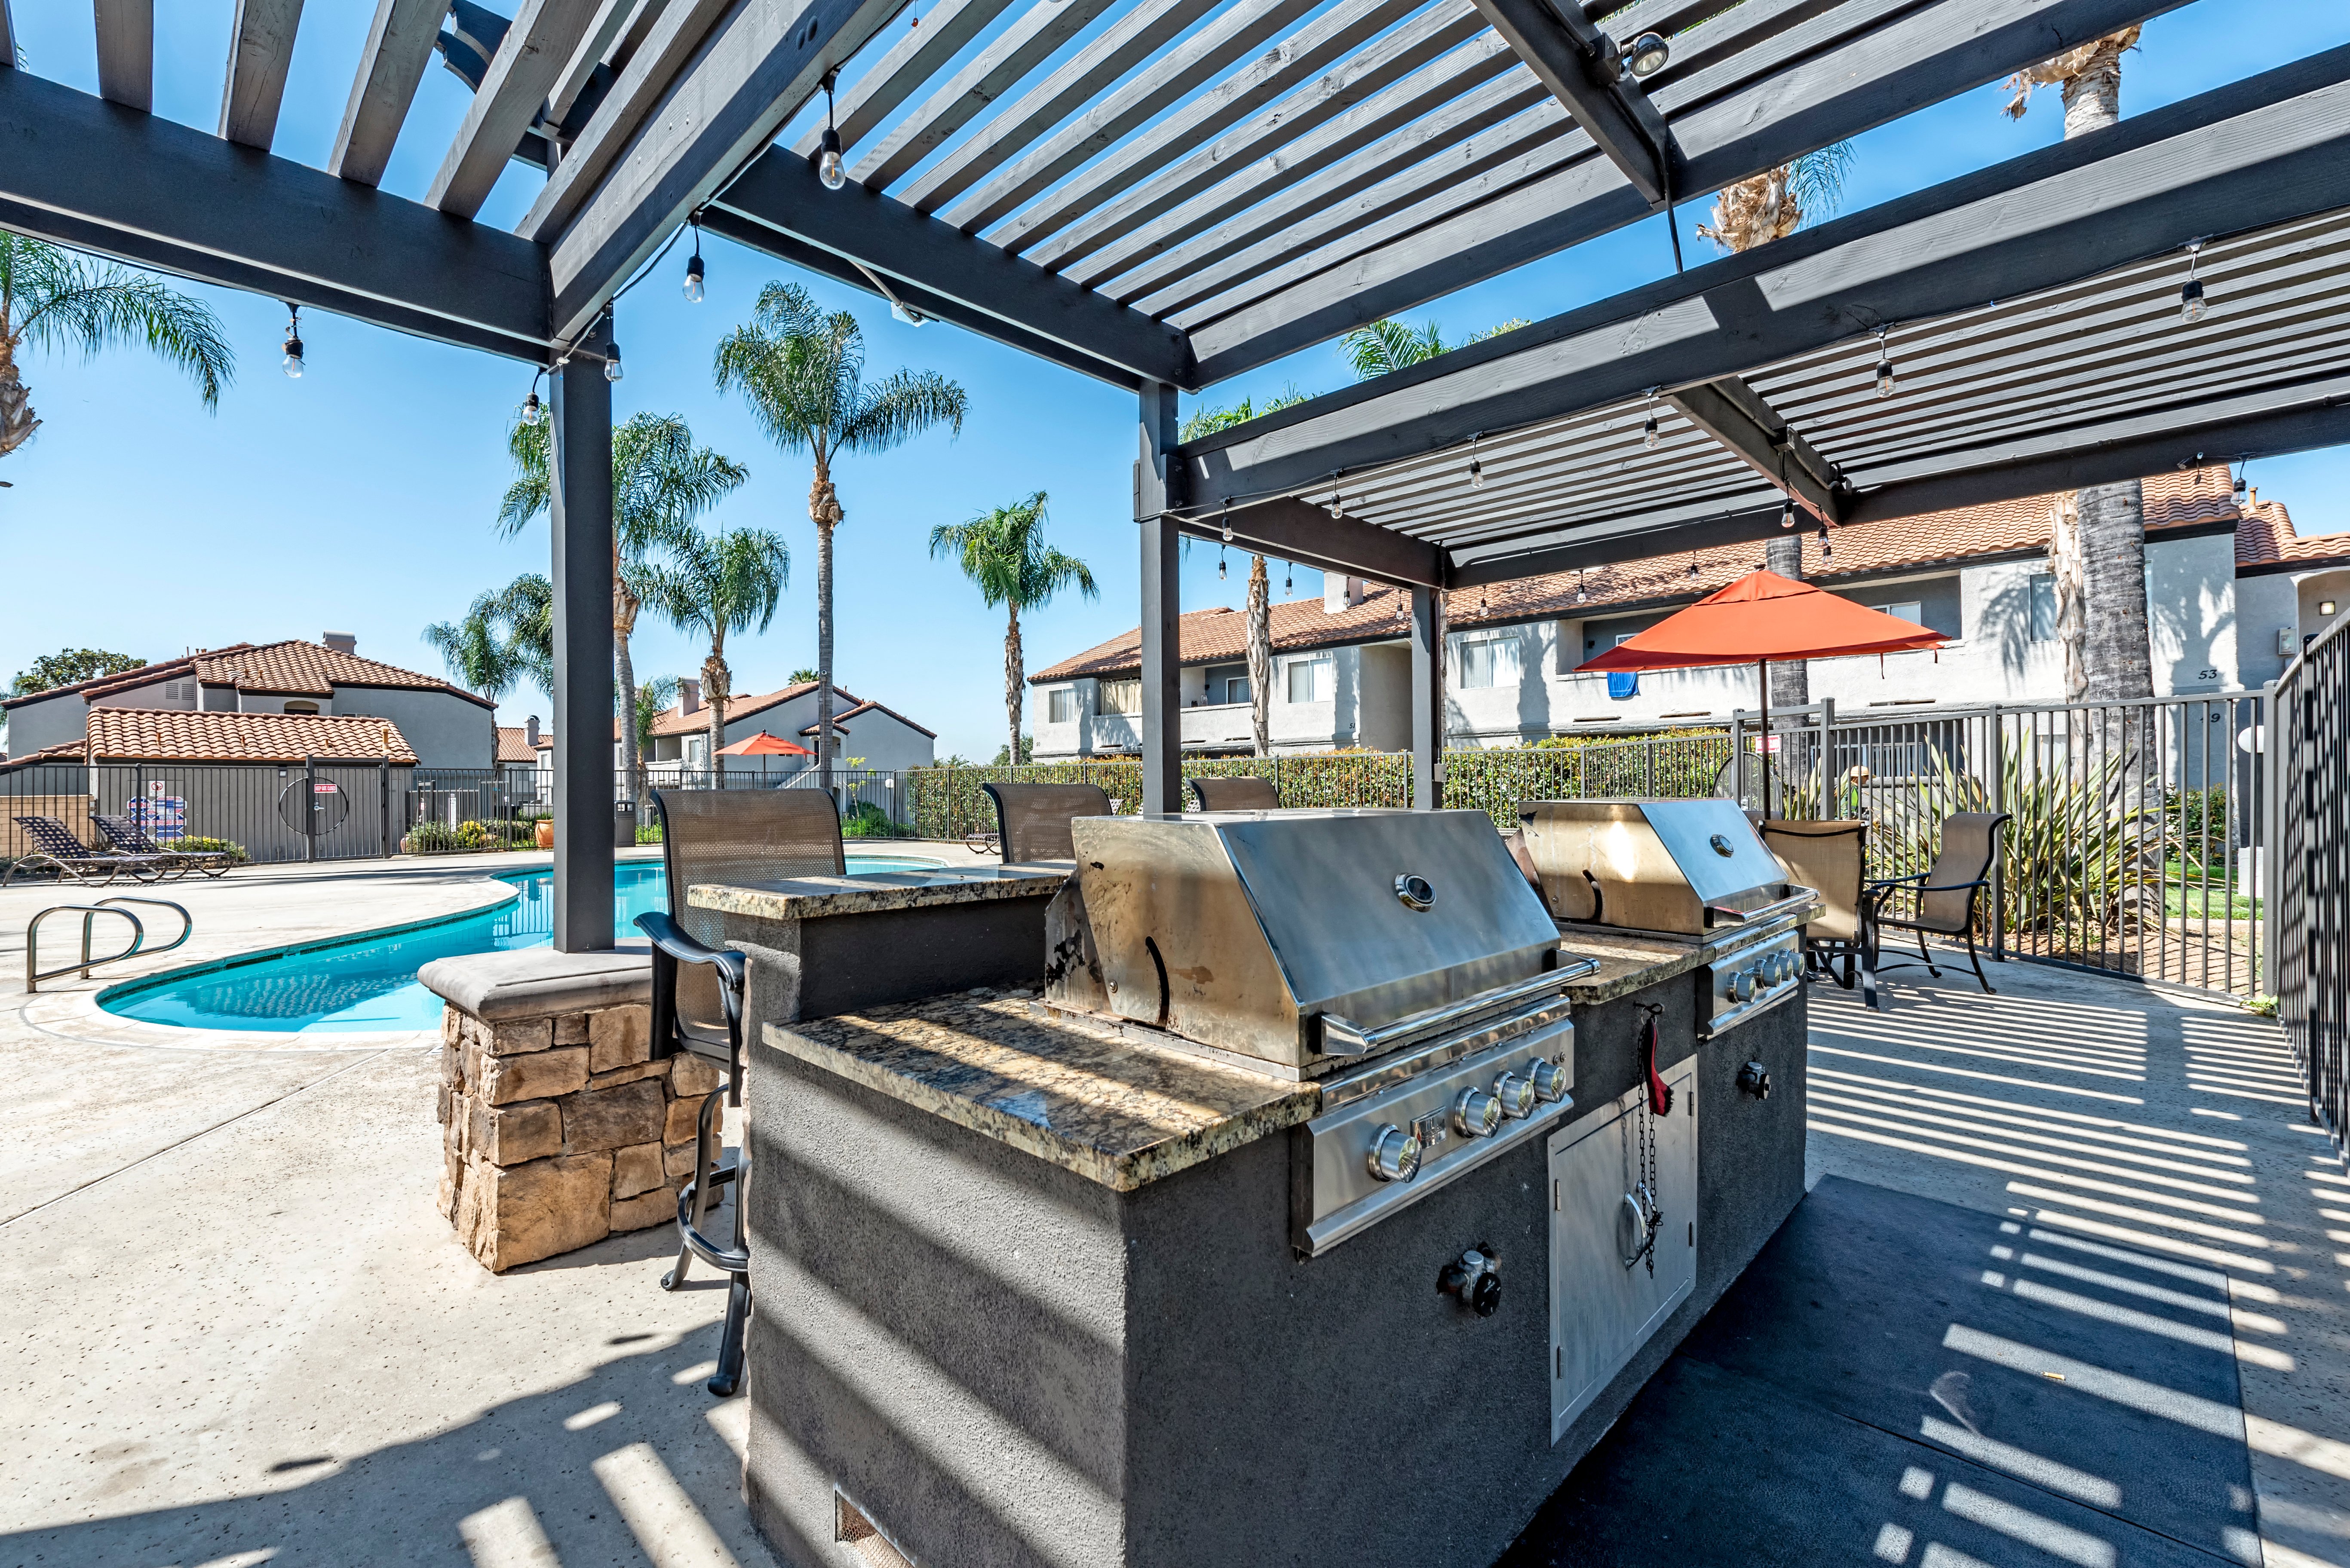 the outdoor kitchen has an outdoor grill and a pool